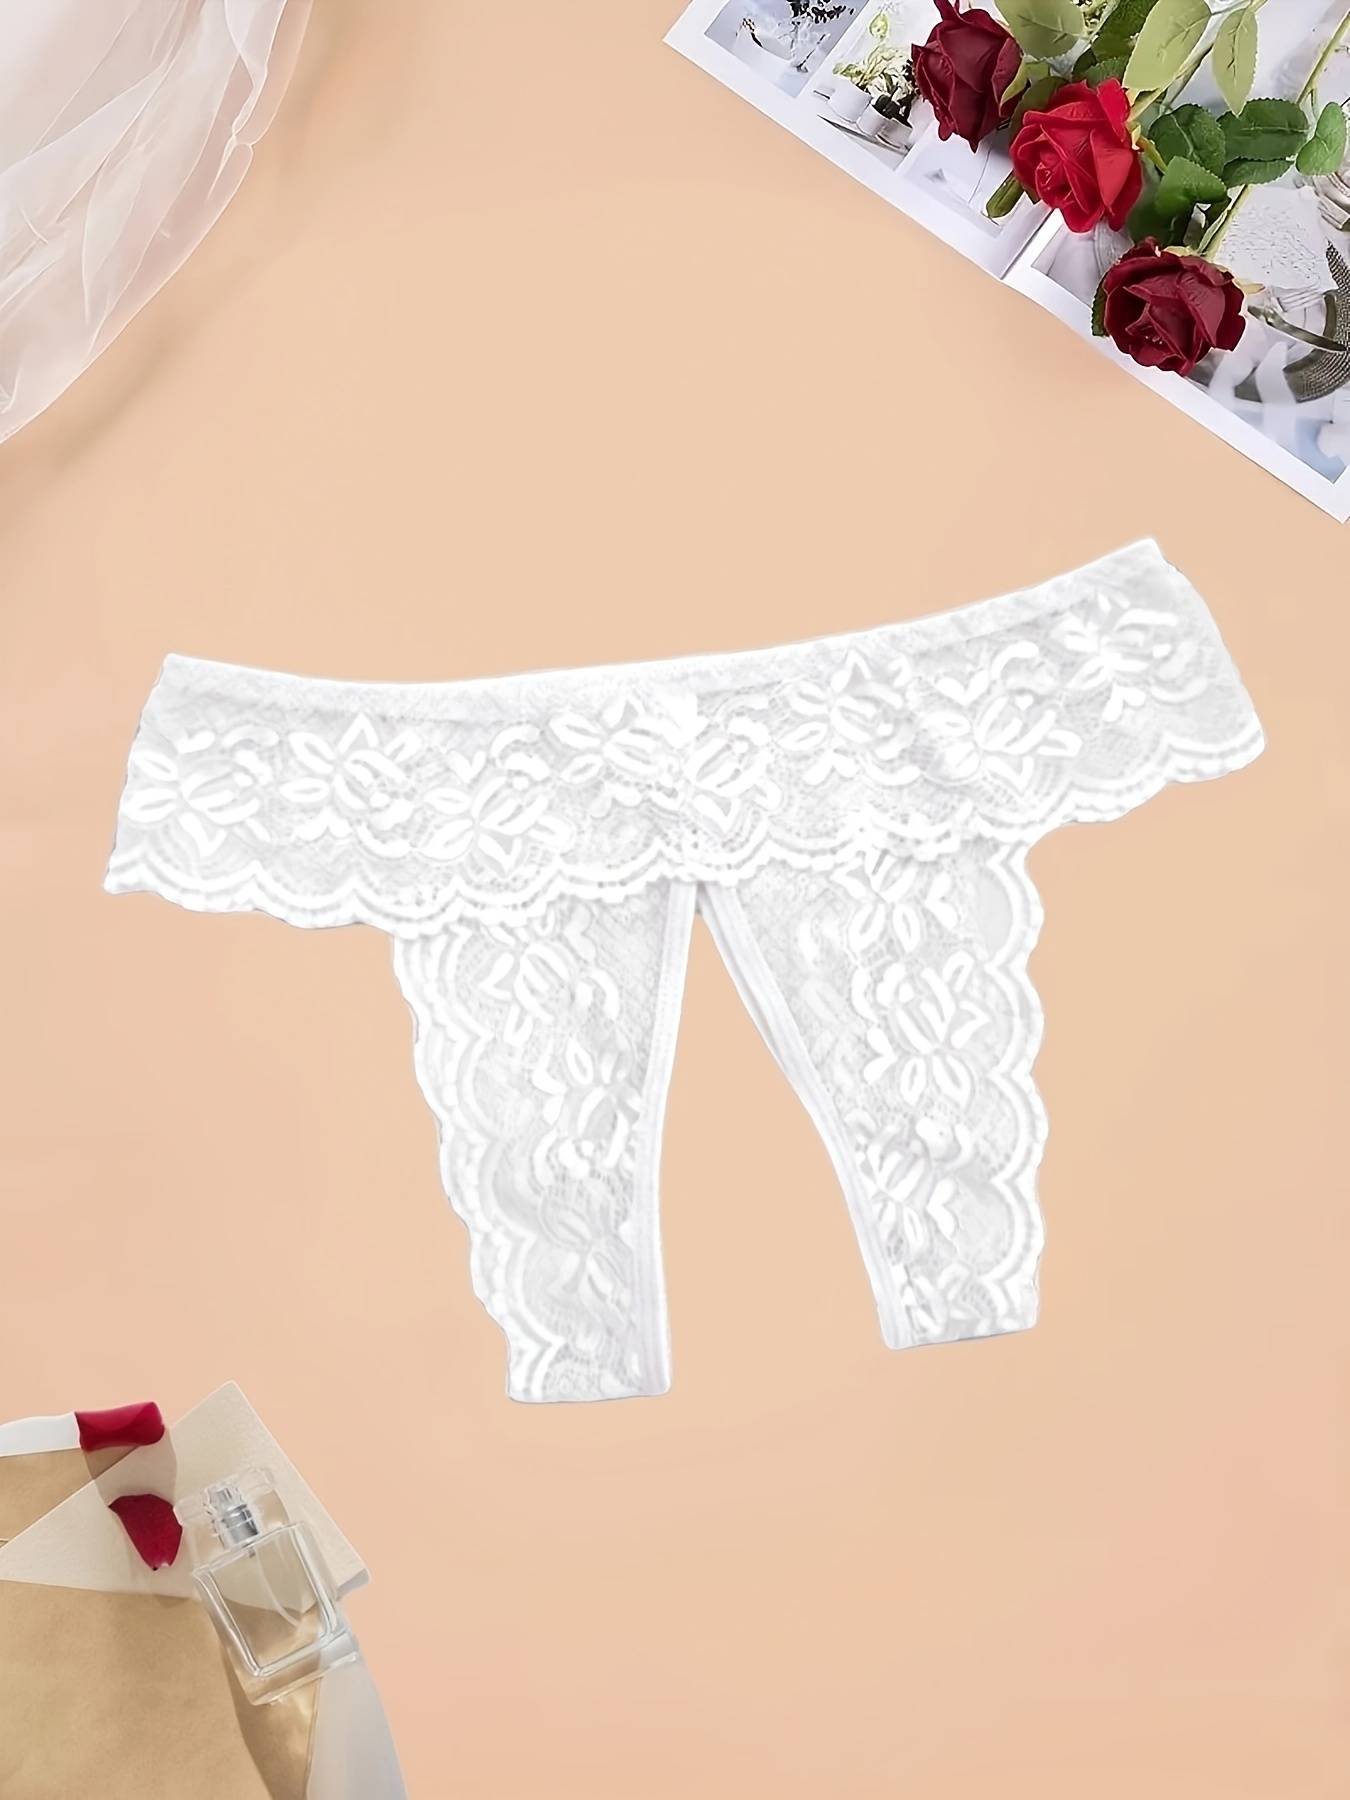 Women Lace G-string Panties Crotchless Floral Briefs Thongs Underwear  Lingerie